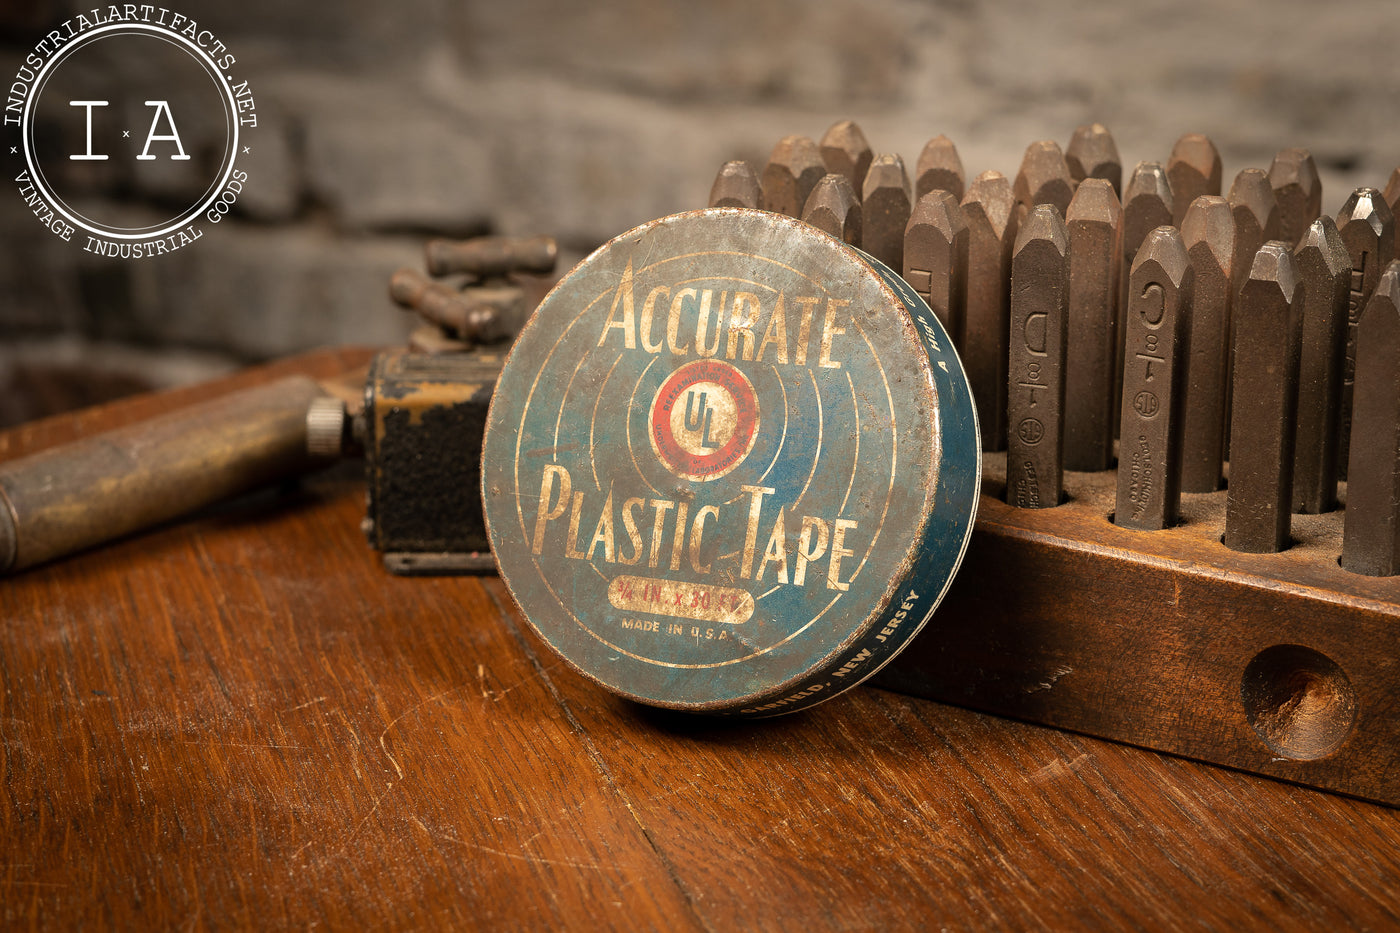 Vintage Electricians Accurate Plastic Tape